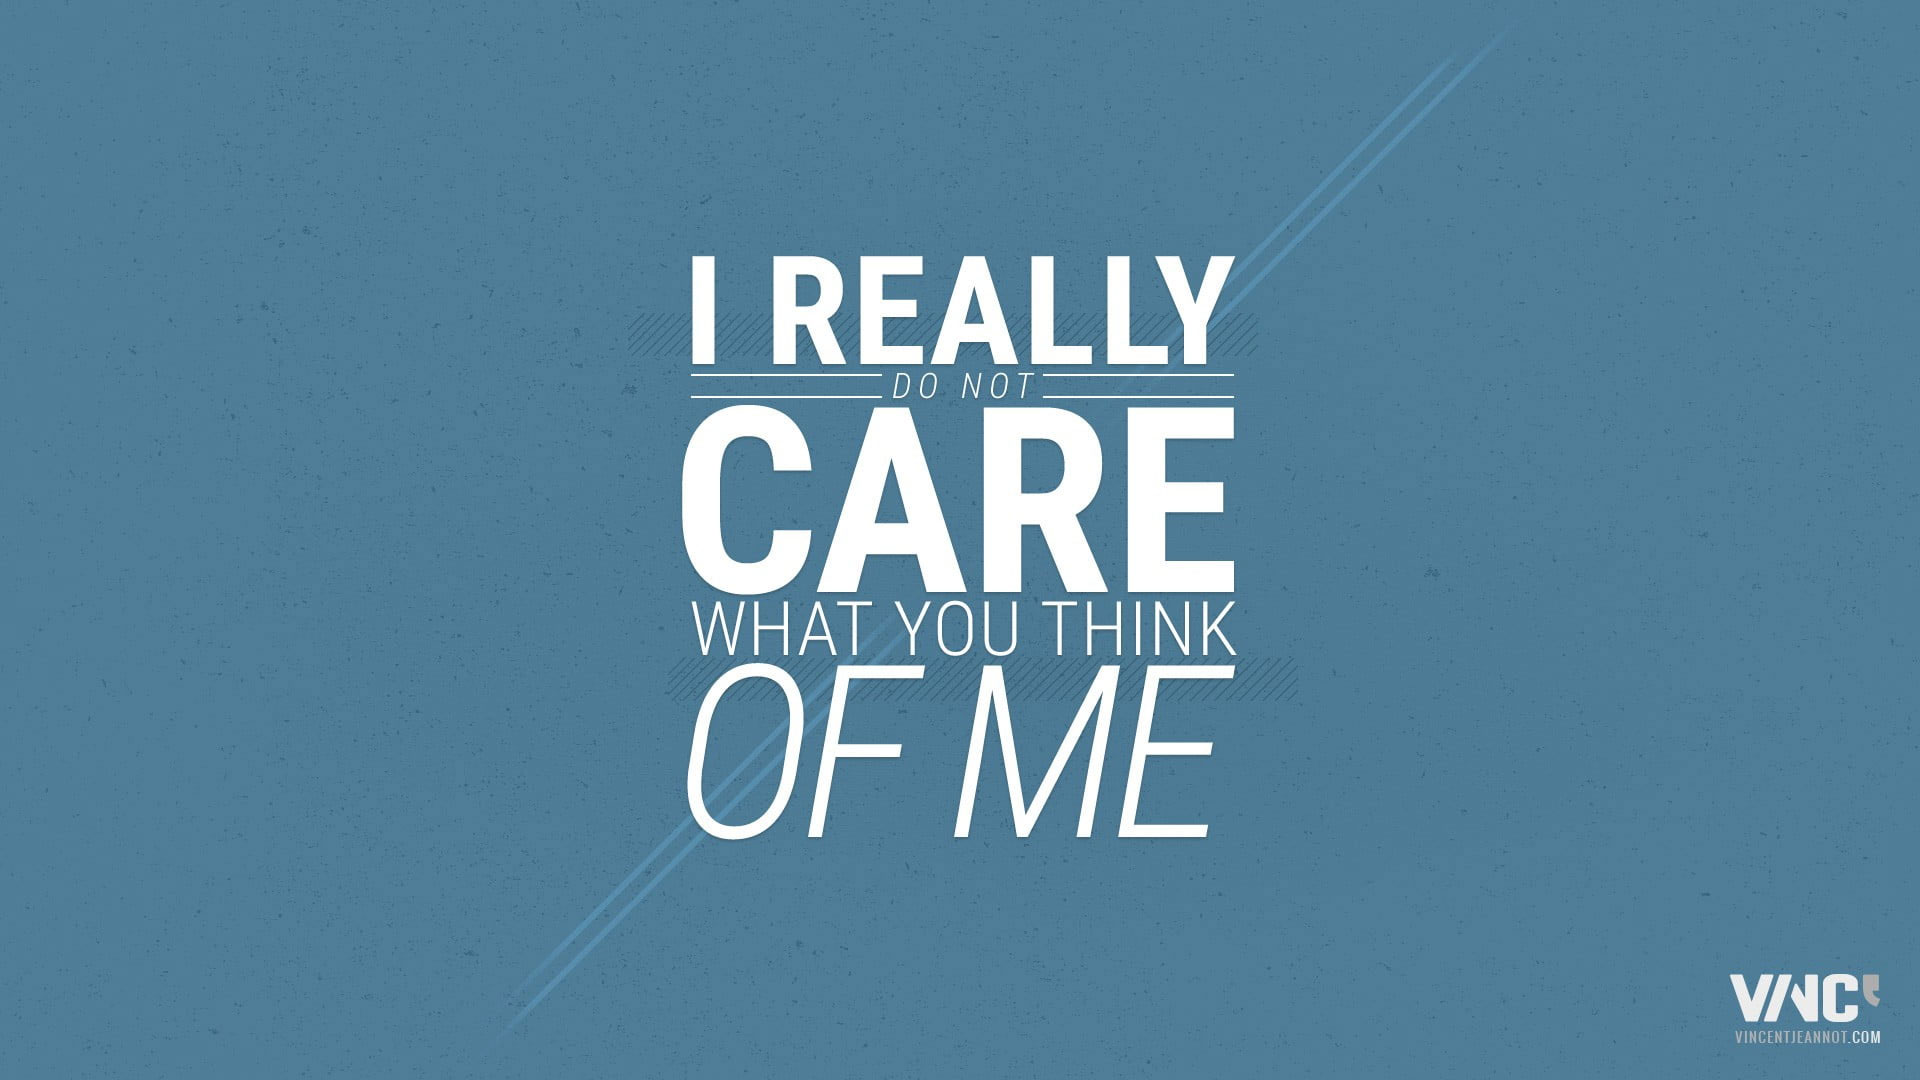 I really do not care what you think of me text with blue wallpaper